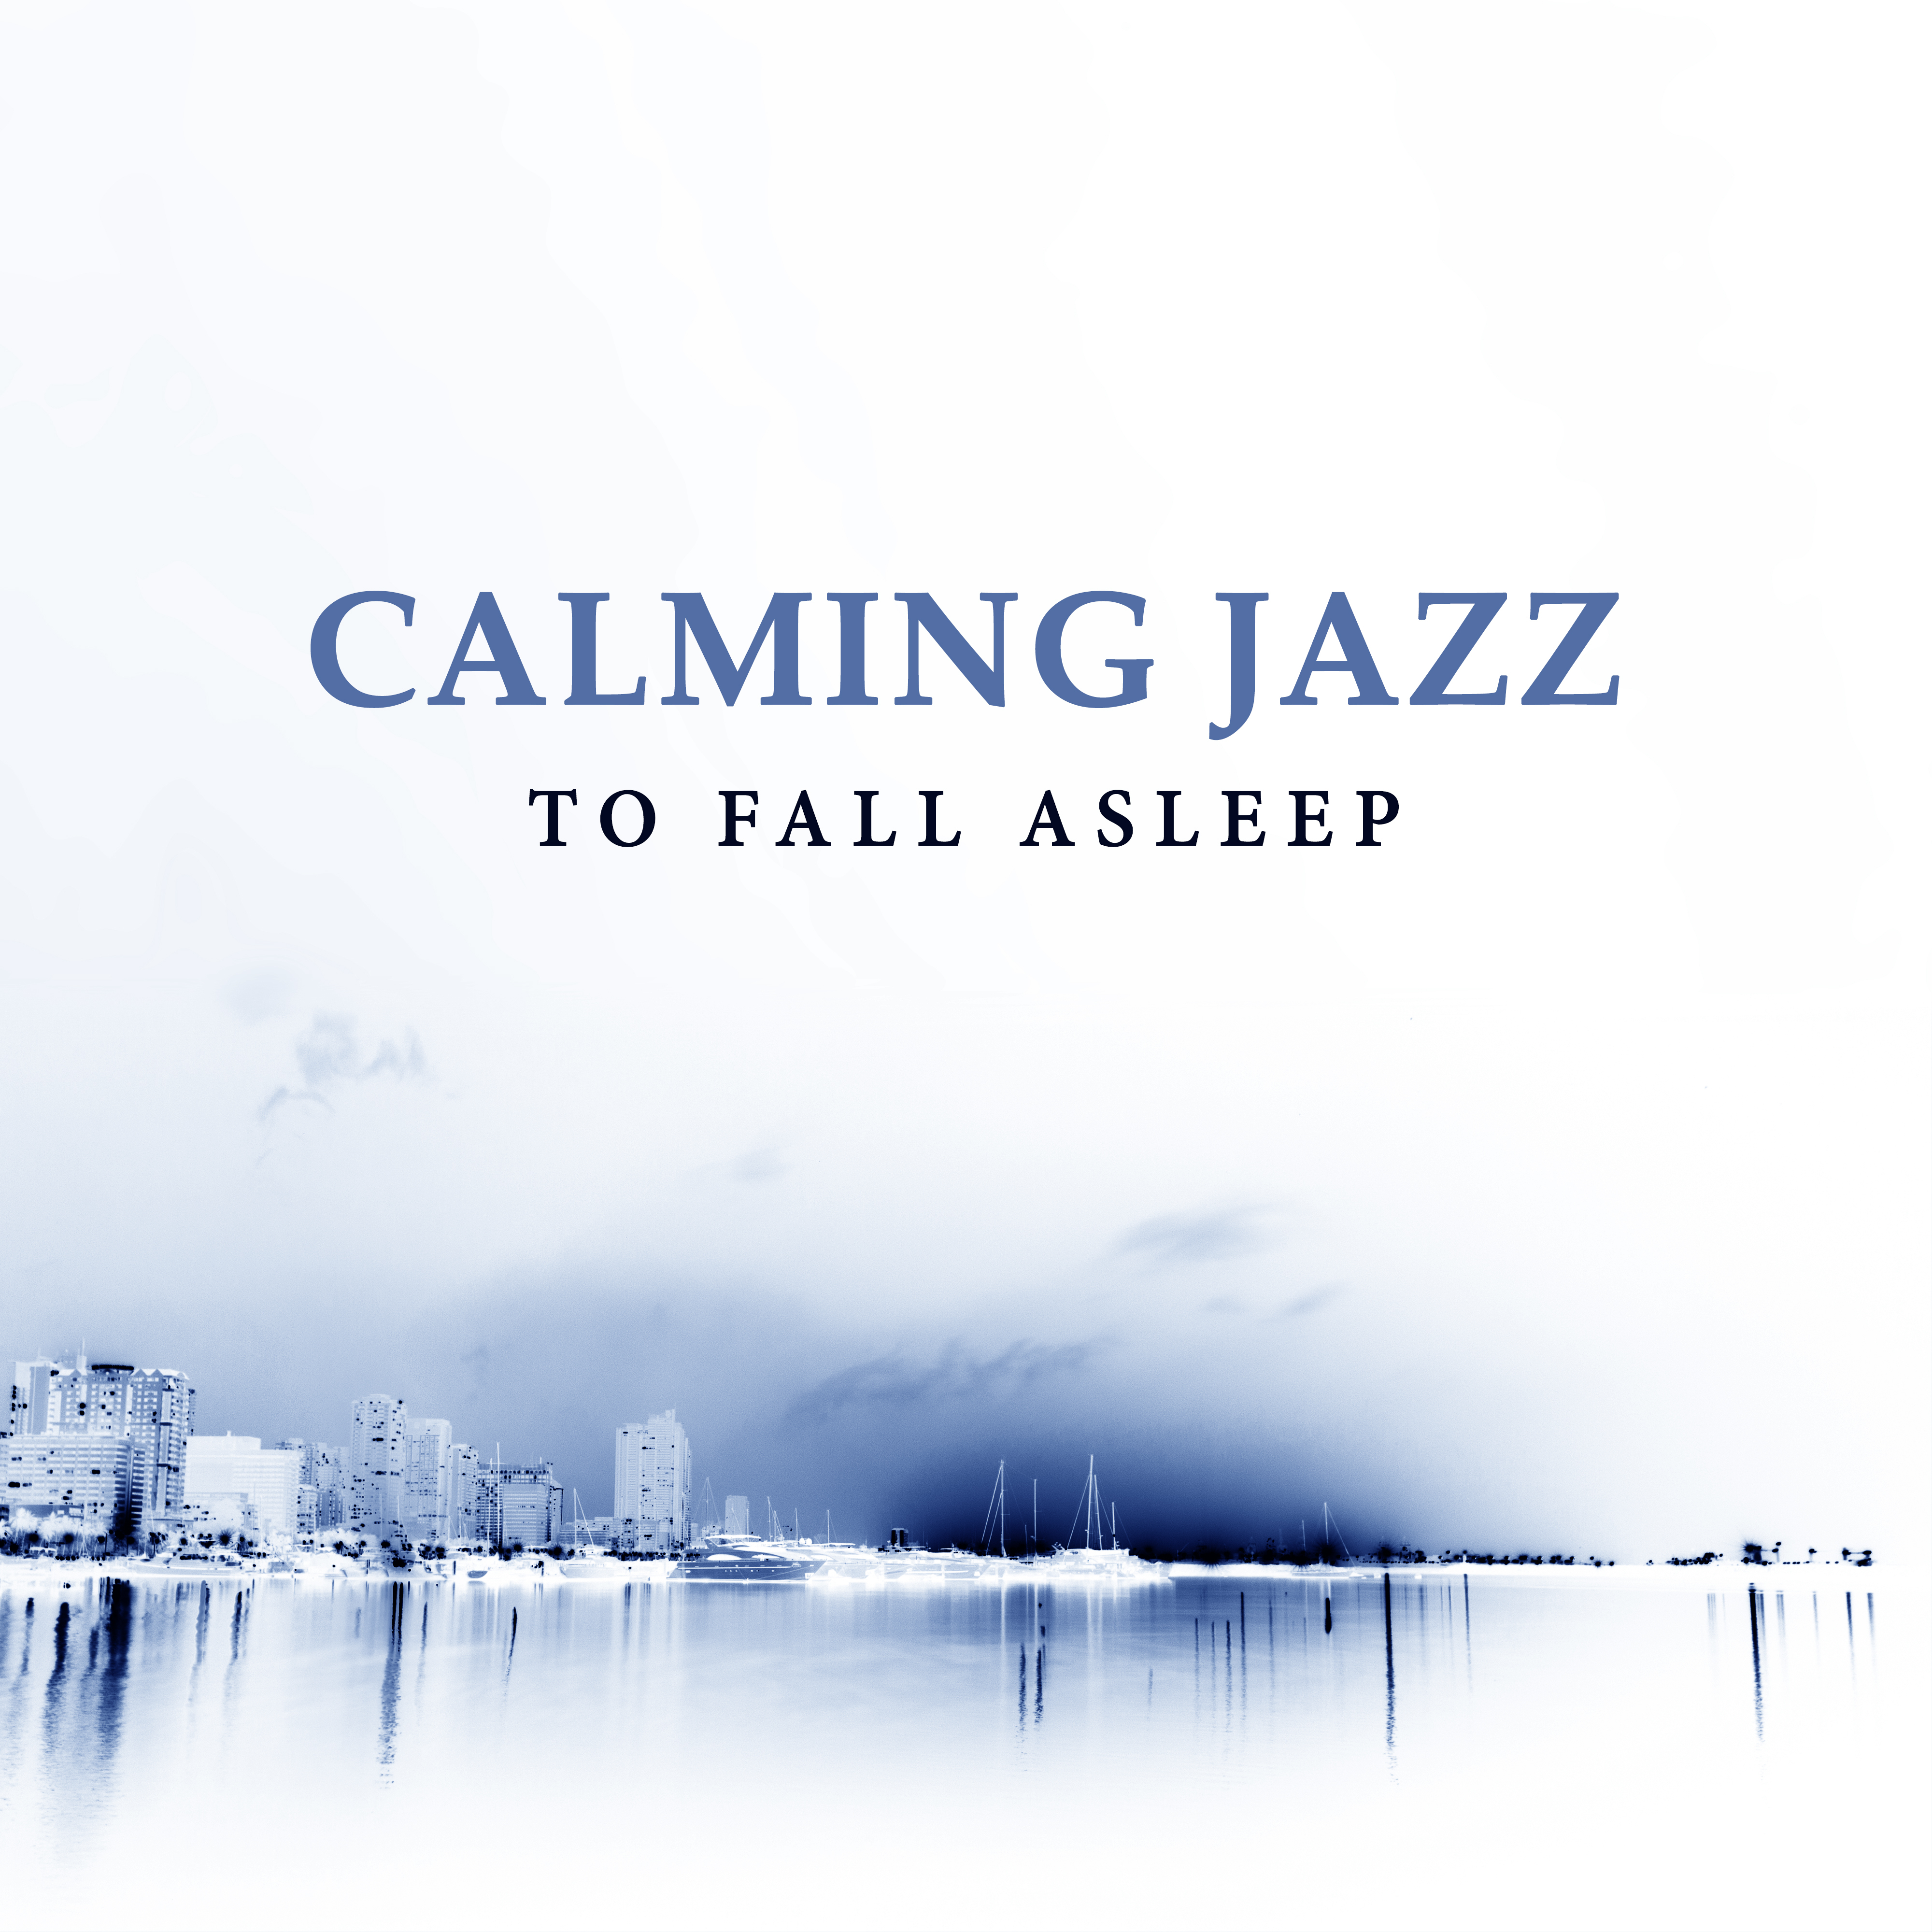 Calming Jazz to Fall Asleep  Rest with Smooth Music, Shades of Jazz, Easy Listening, Relaxing Night Sounds, Waves of Calmness